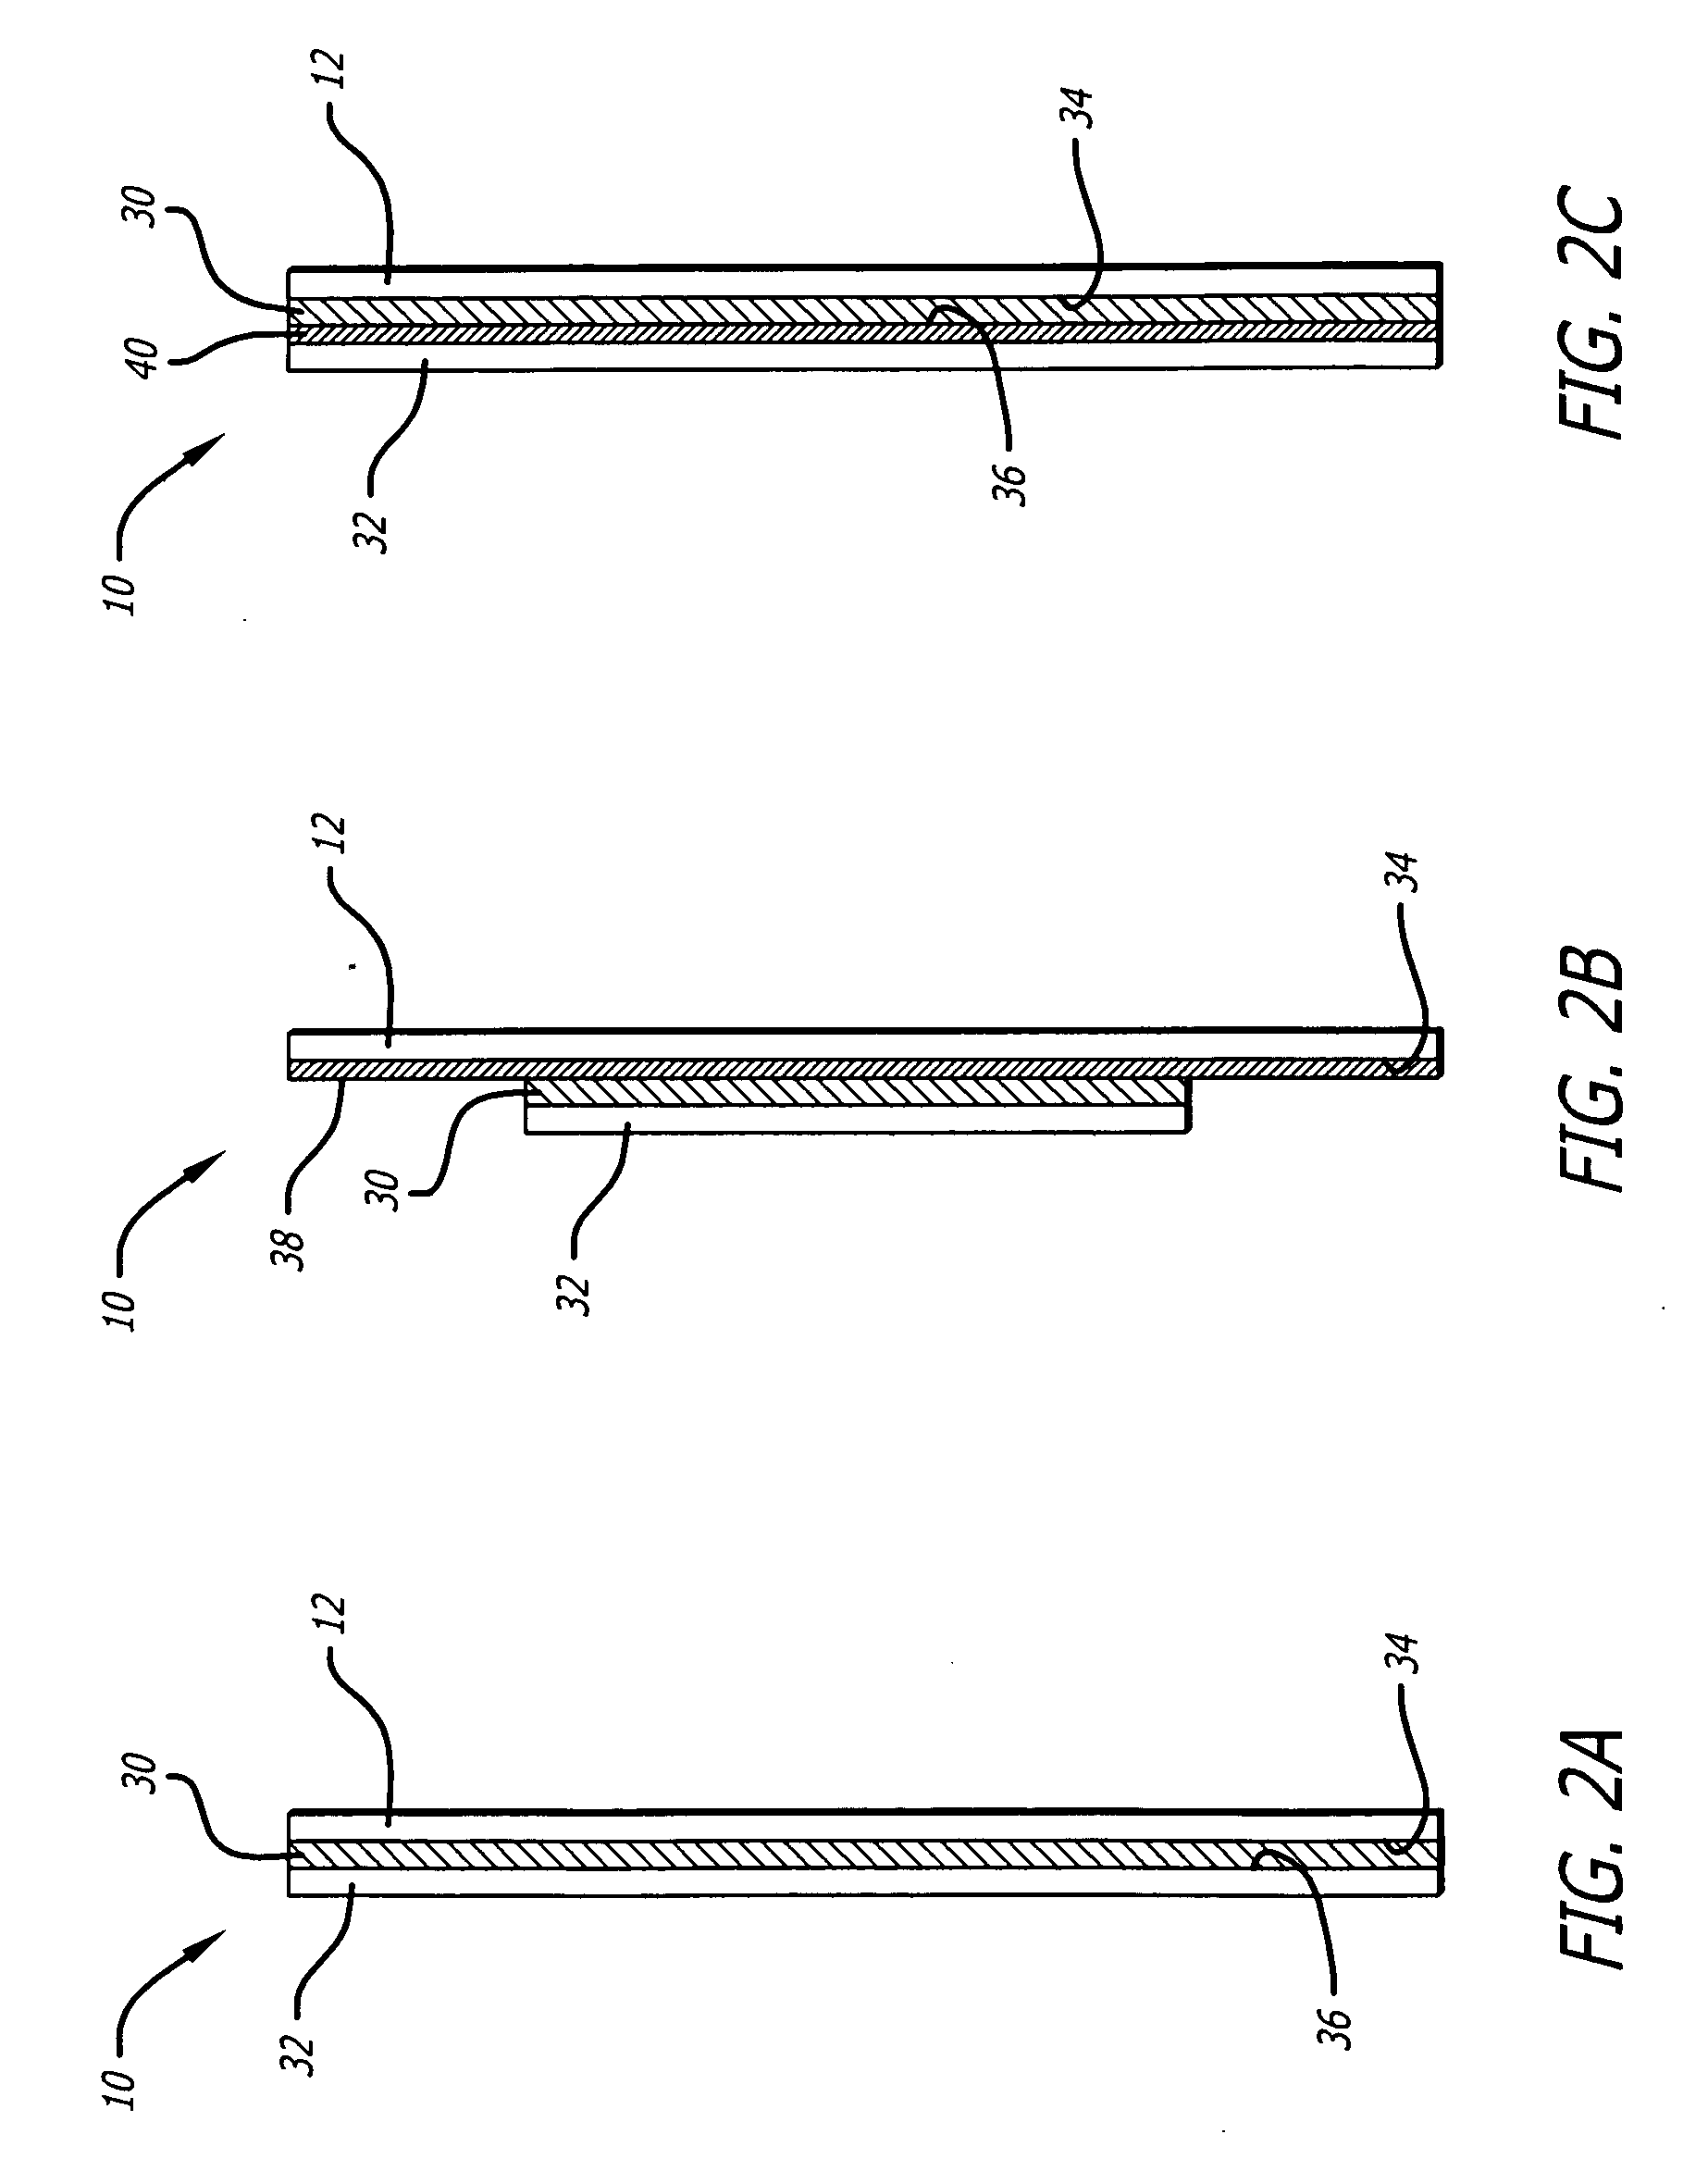 Apparatus, system, and method for personalizing a portable electronic device